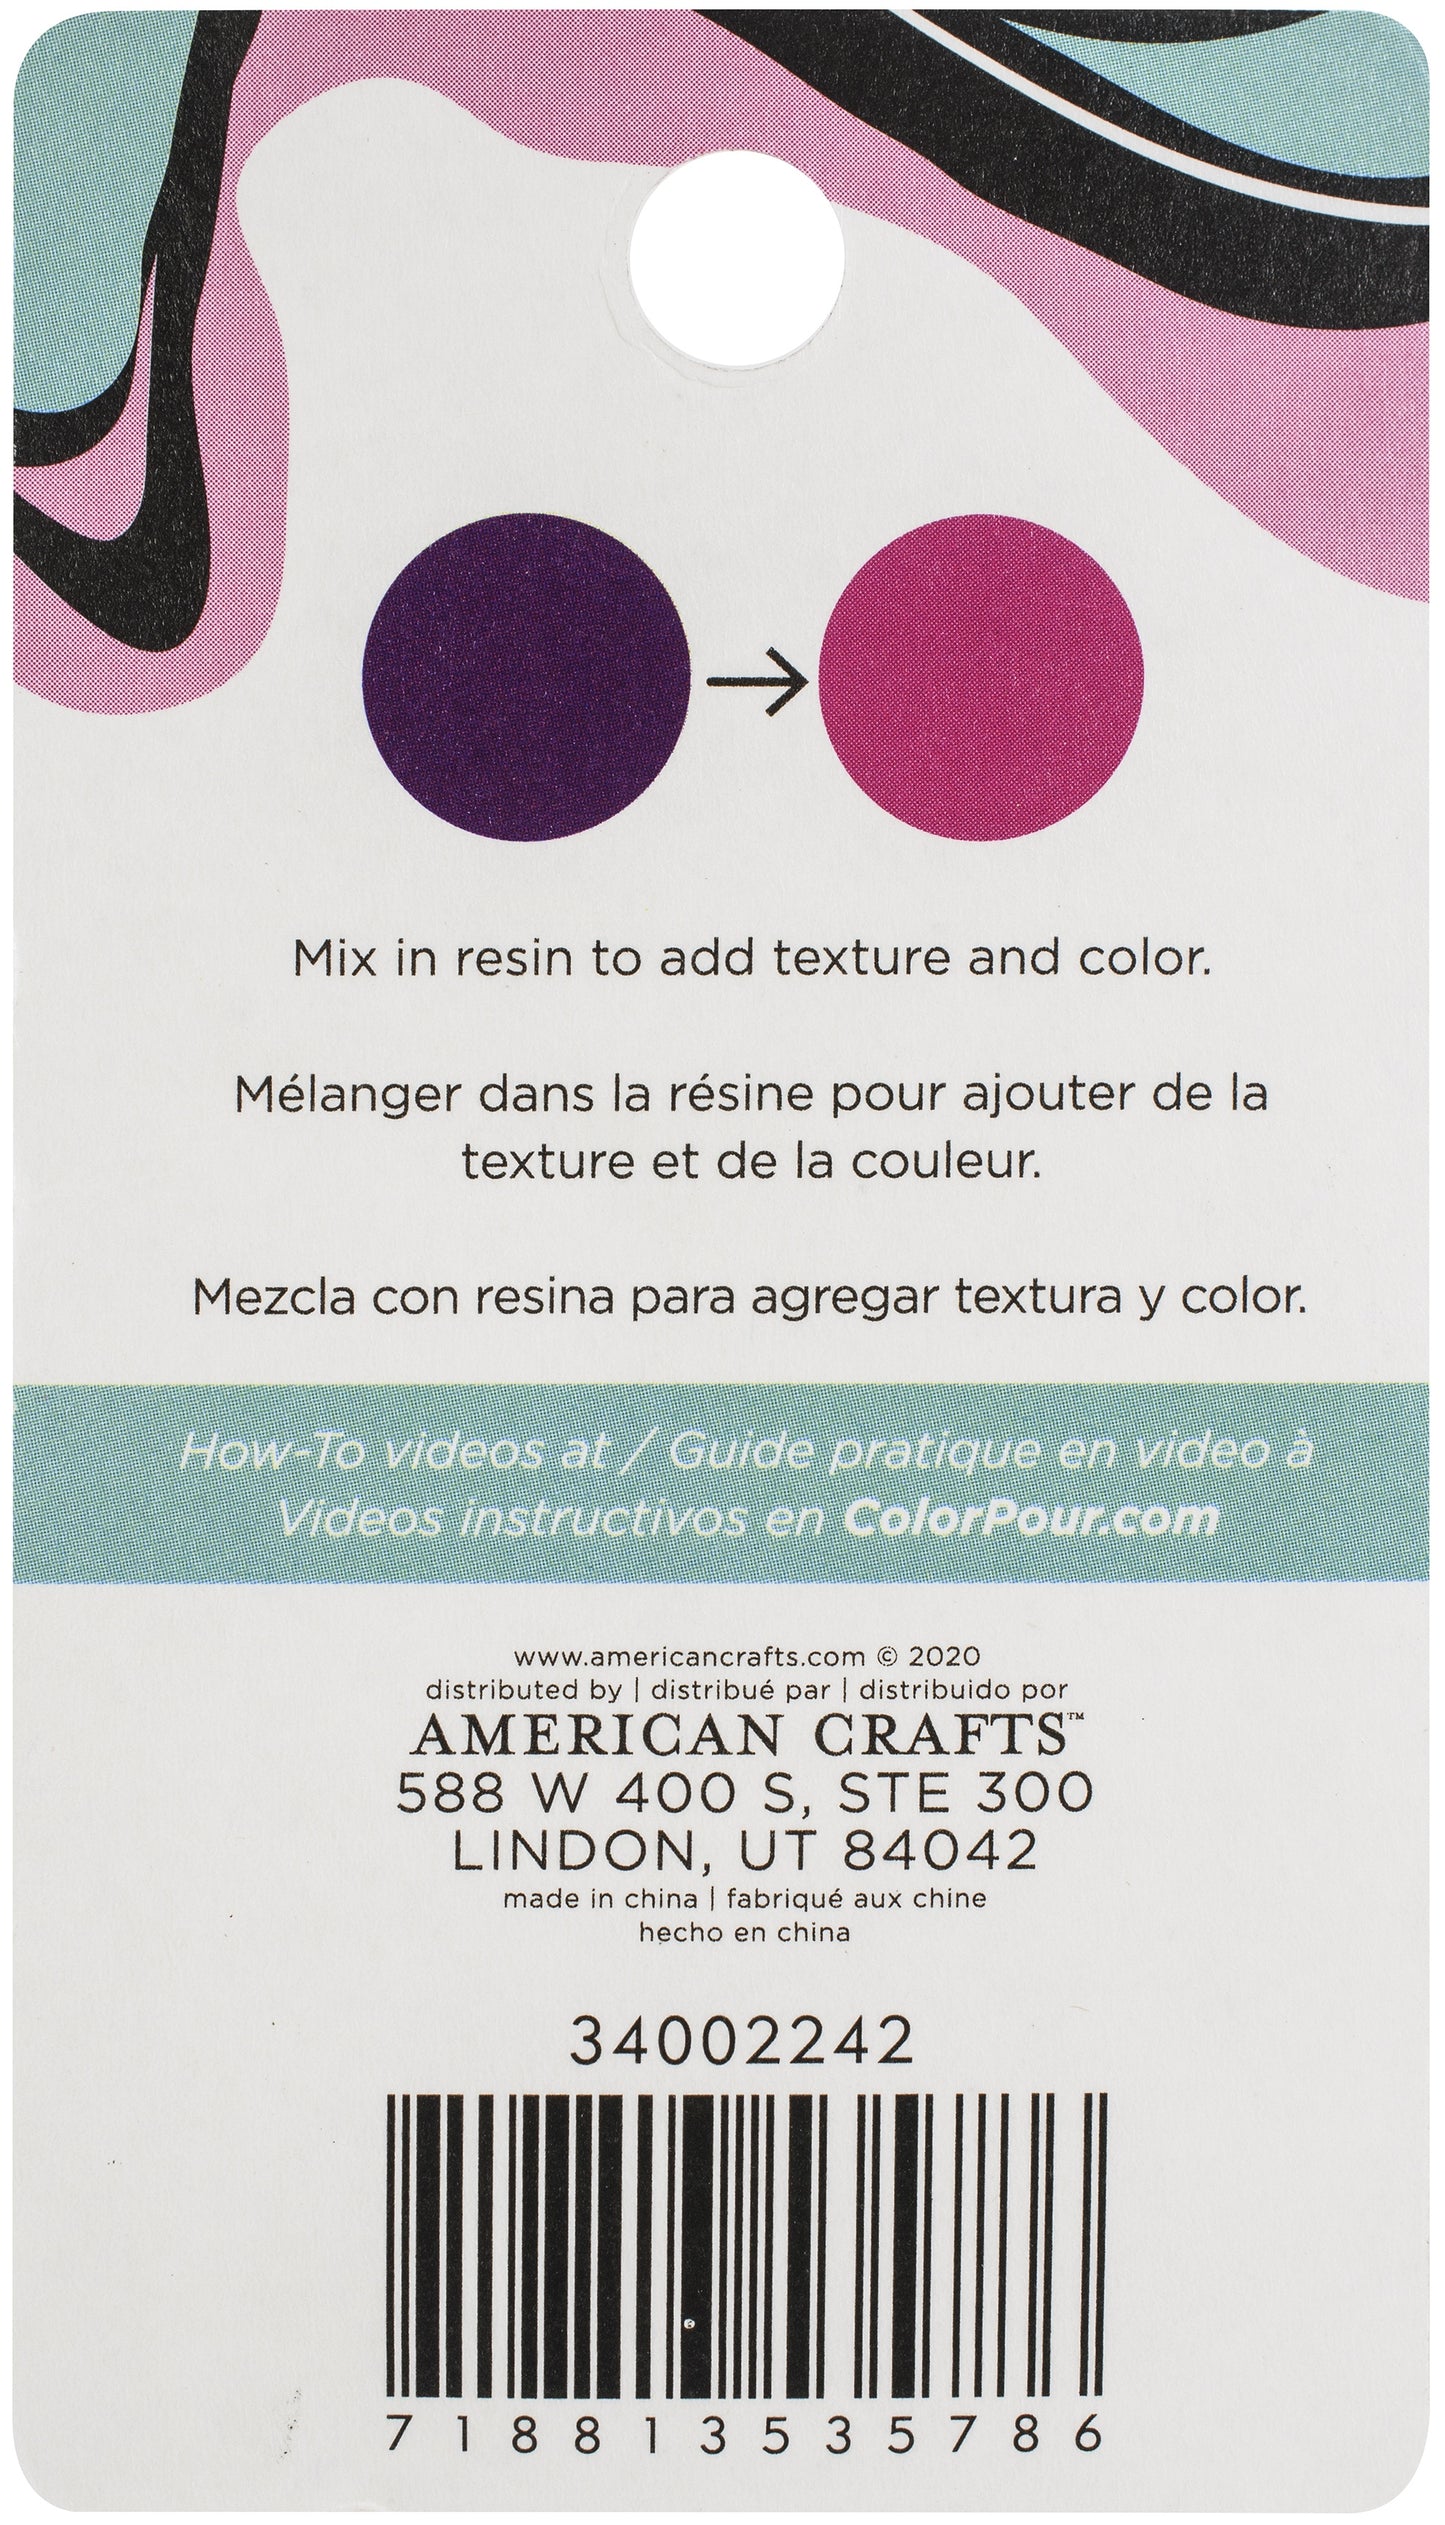 American Crafts Color Pour Thermal Powder 12oz-Purple To Pink